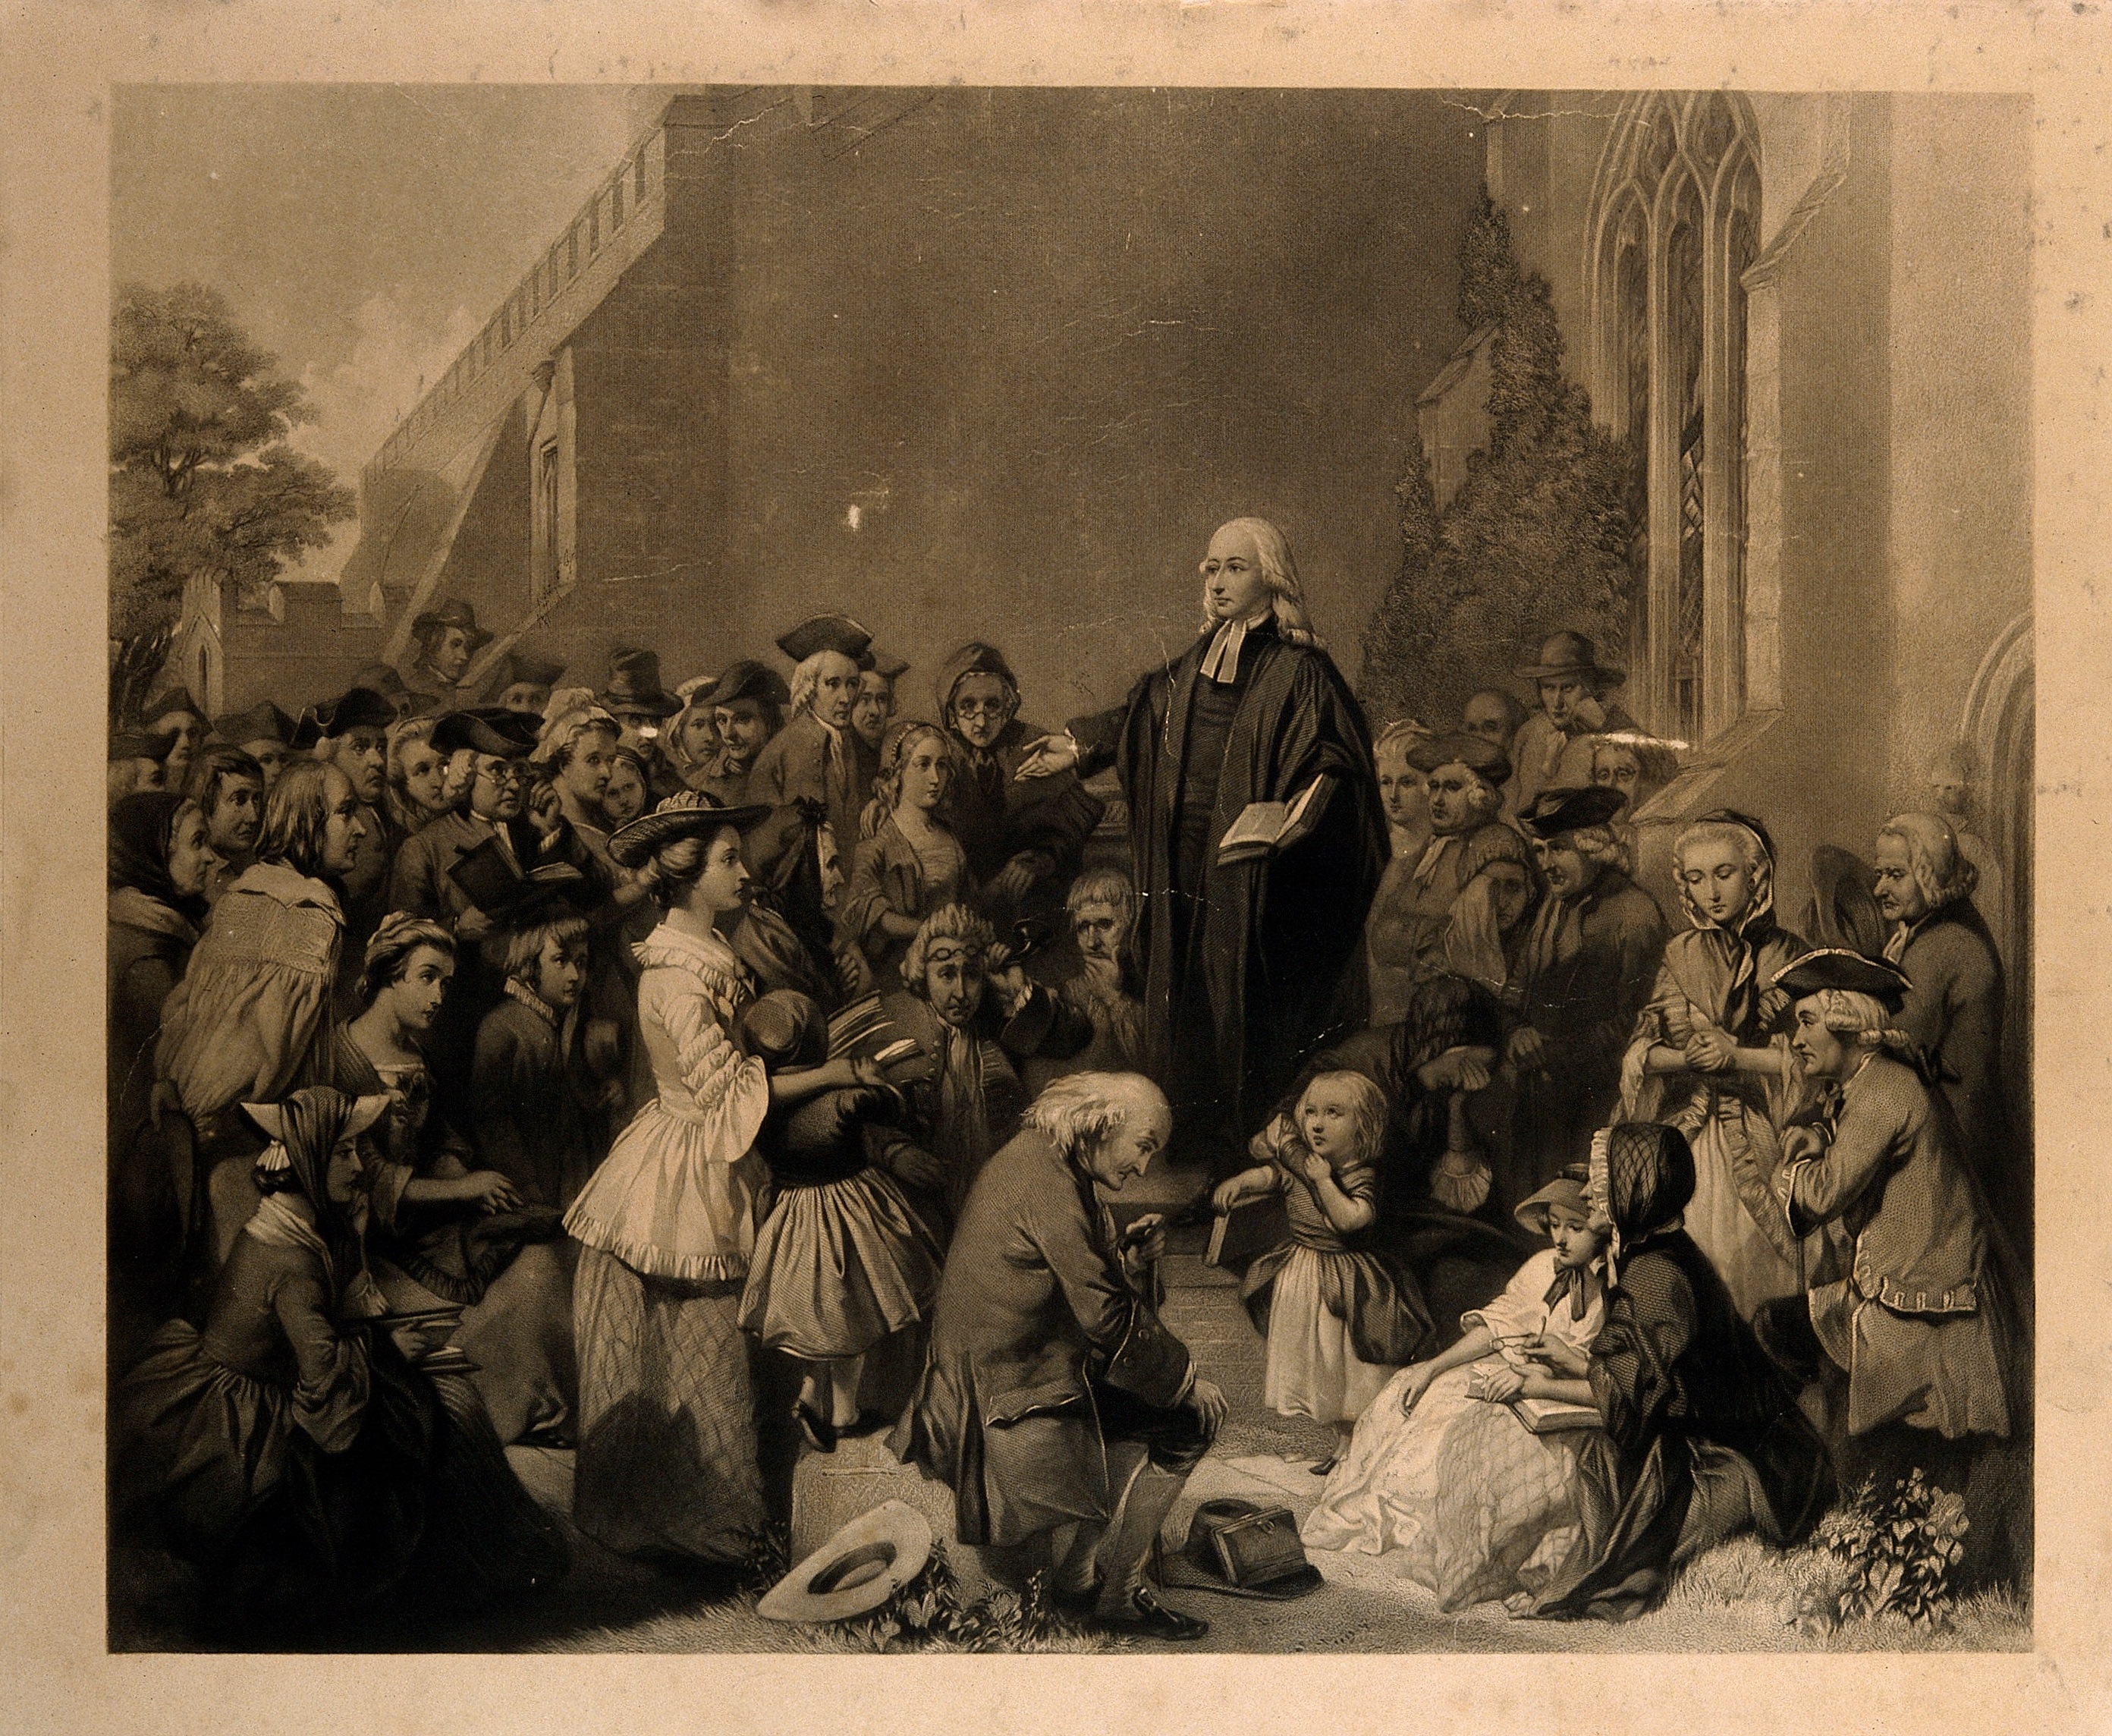 John Wesley preaching to a crowd